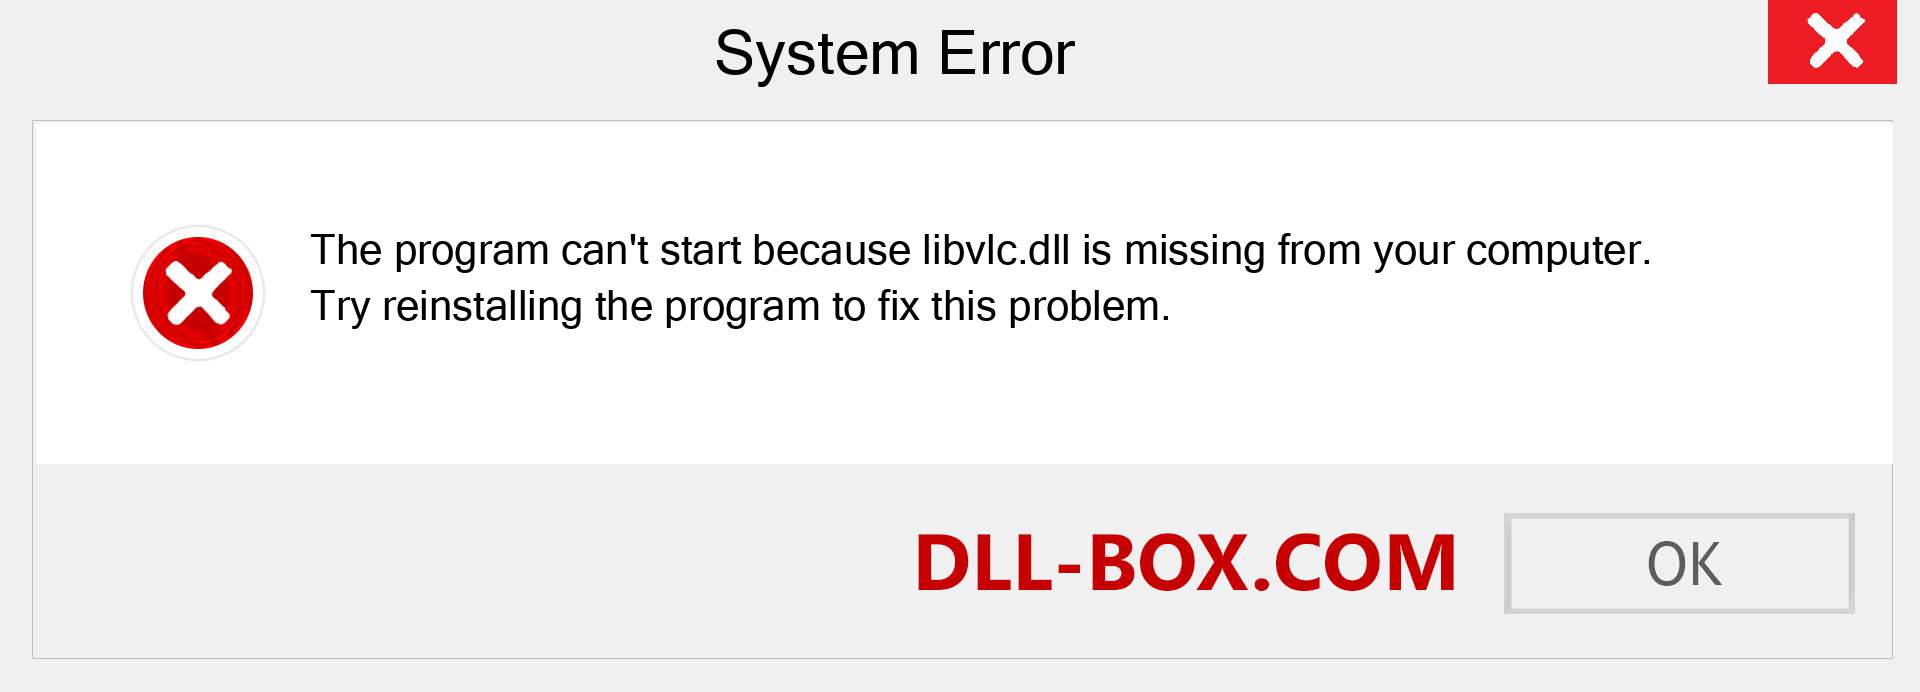  libvlc.dll file is missing?. Download for Windows 7, 8, 10 - Fix  libvlc dll Missing Error on Windows, photos, images